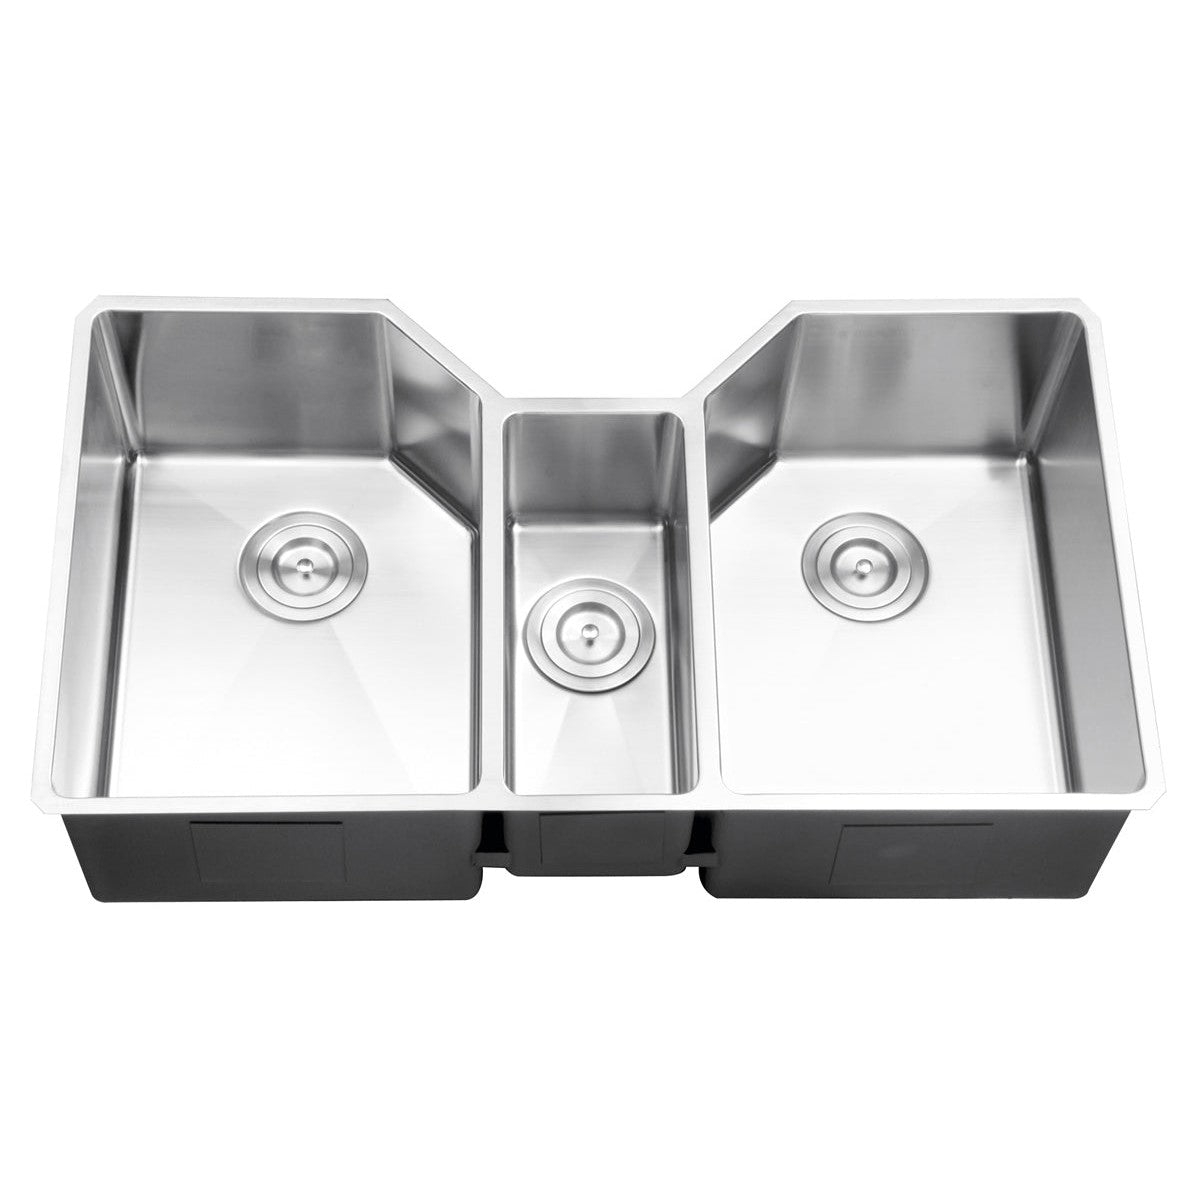 Ruvati Gravena 35" x 20" Undermount Stainless Steel Triple Bowl Kitchen Sink With Basket Strainer, Bottom Rinse Grid and Drain Assembly